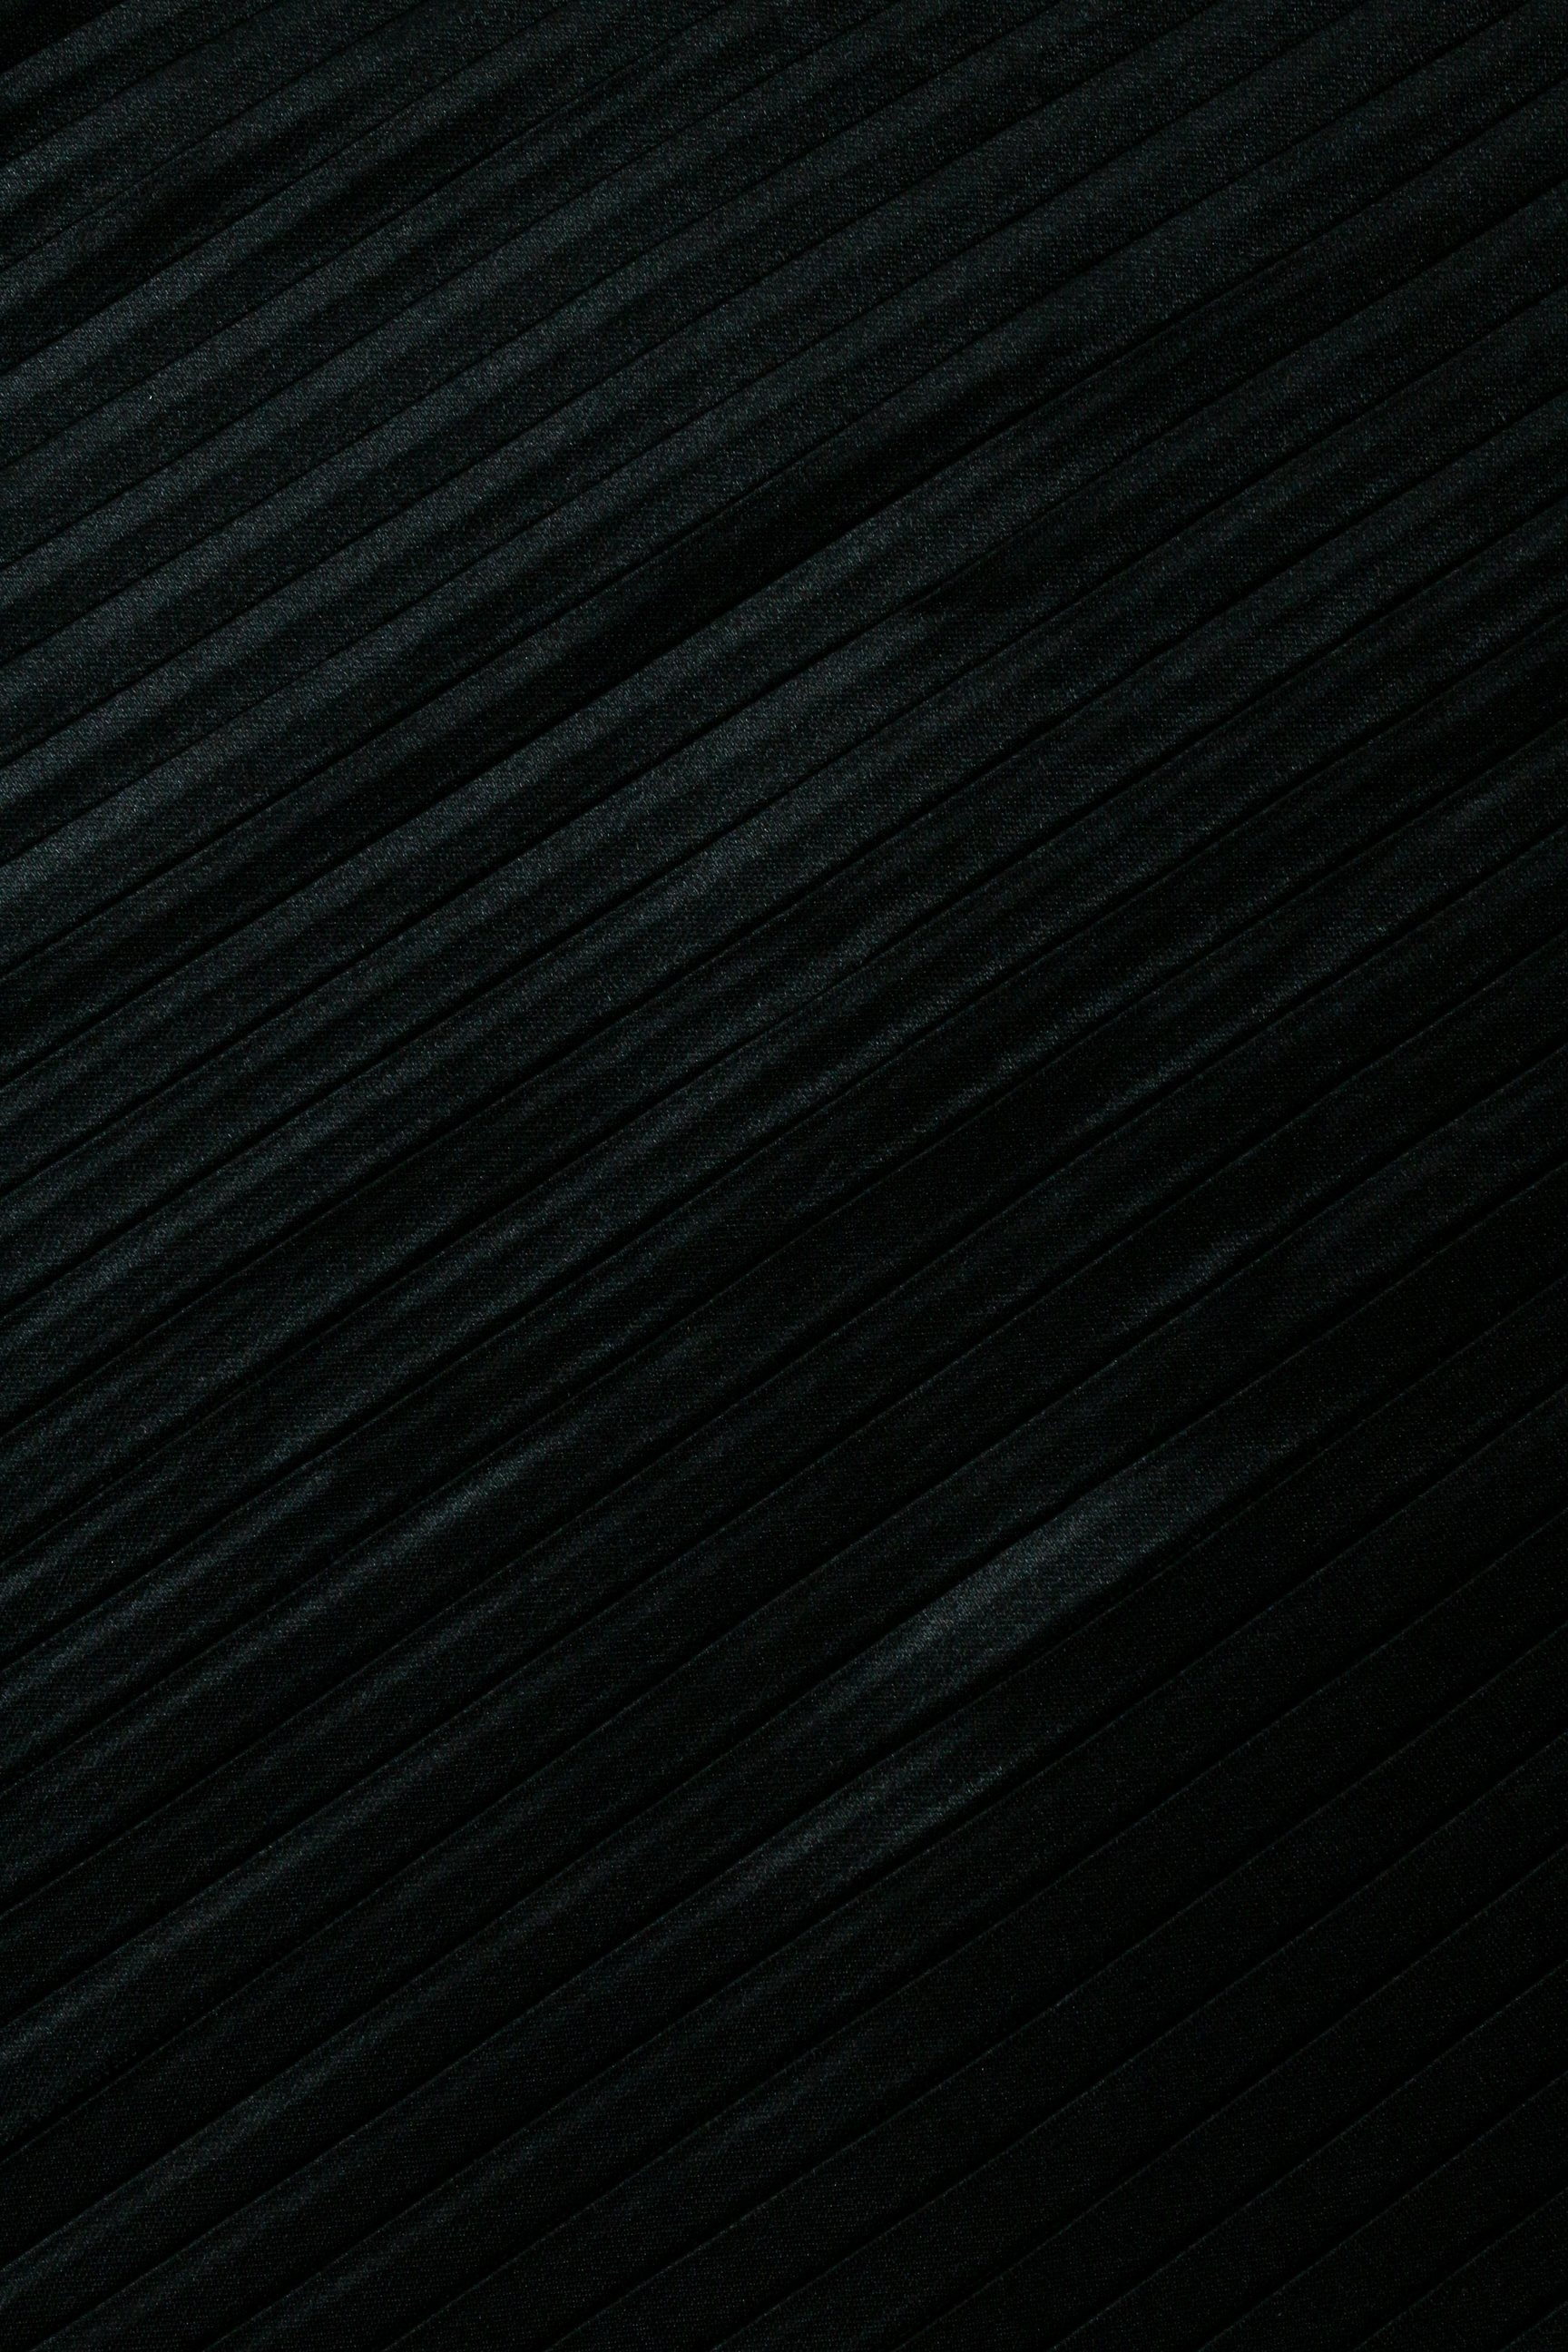 A Black Textured Surface